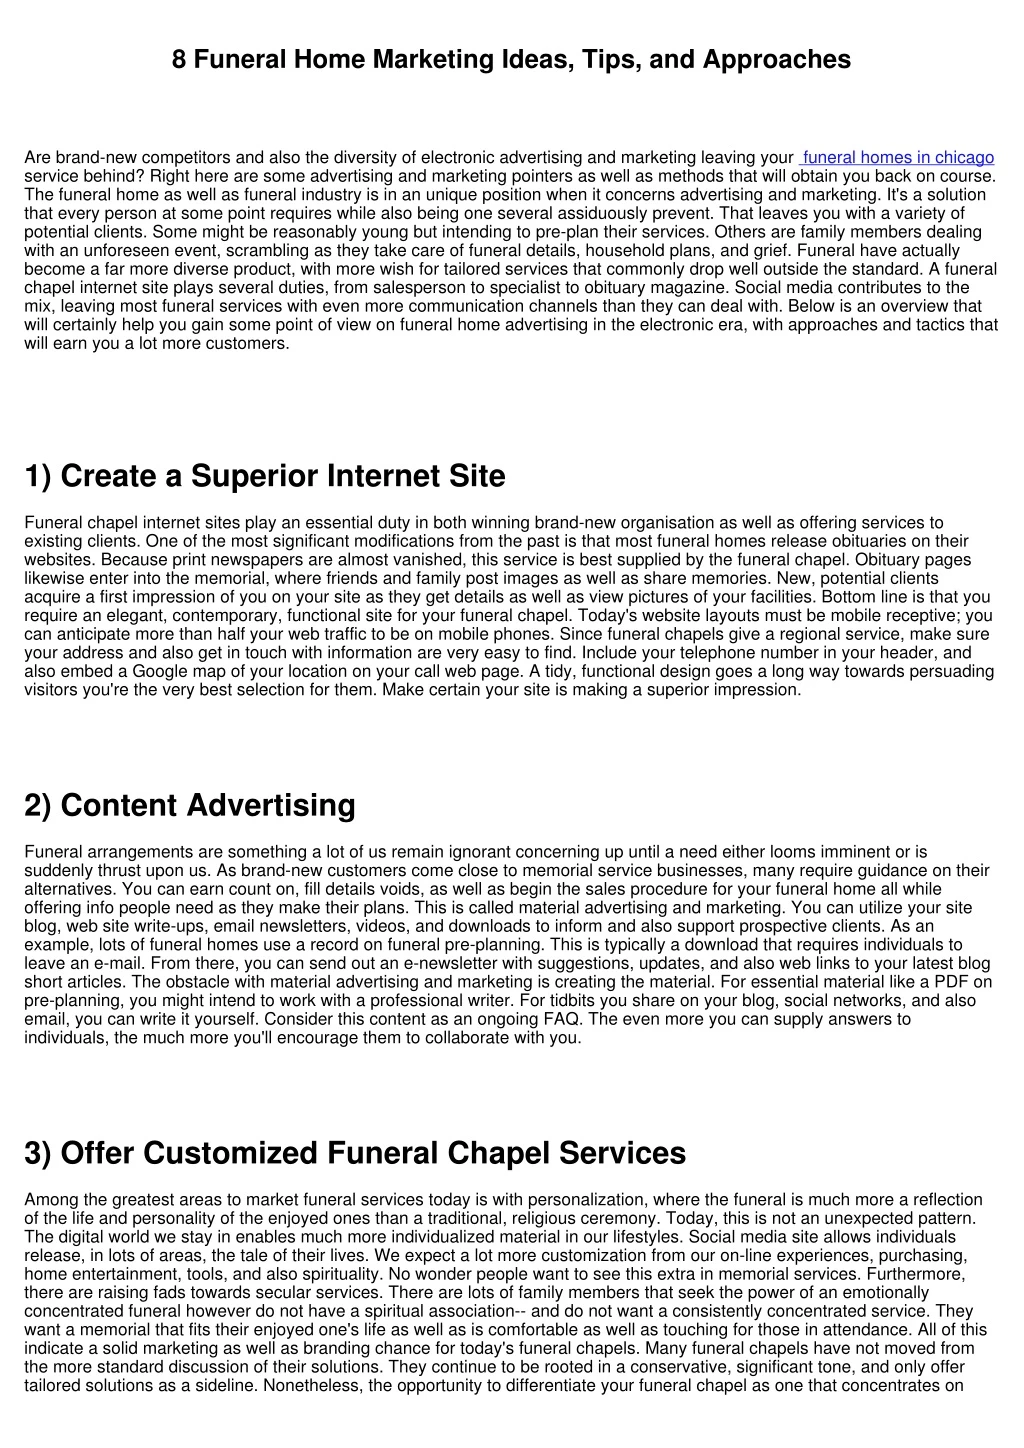 8 funeral home marketing ideas tips and approaches